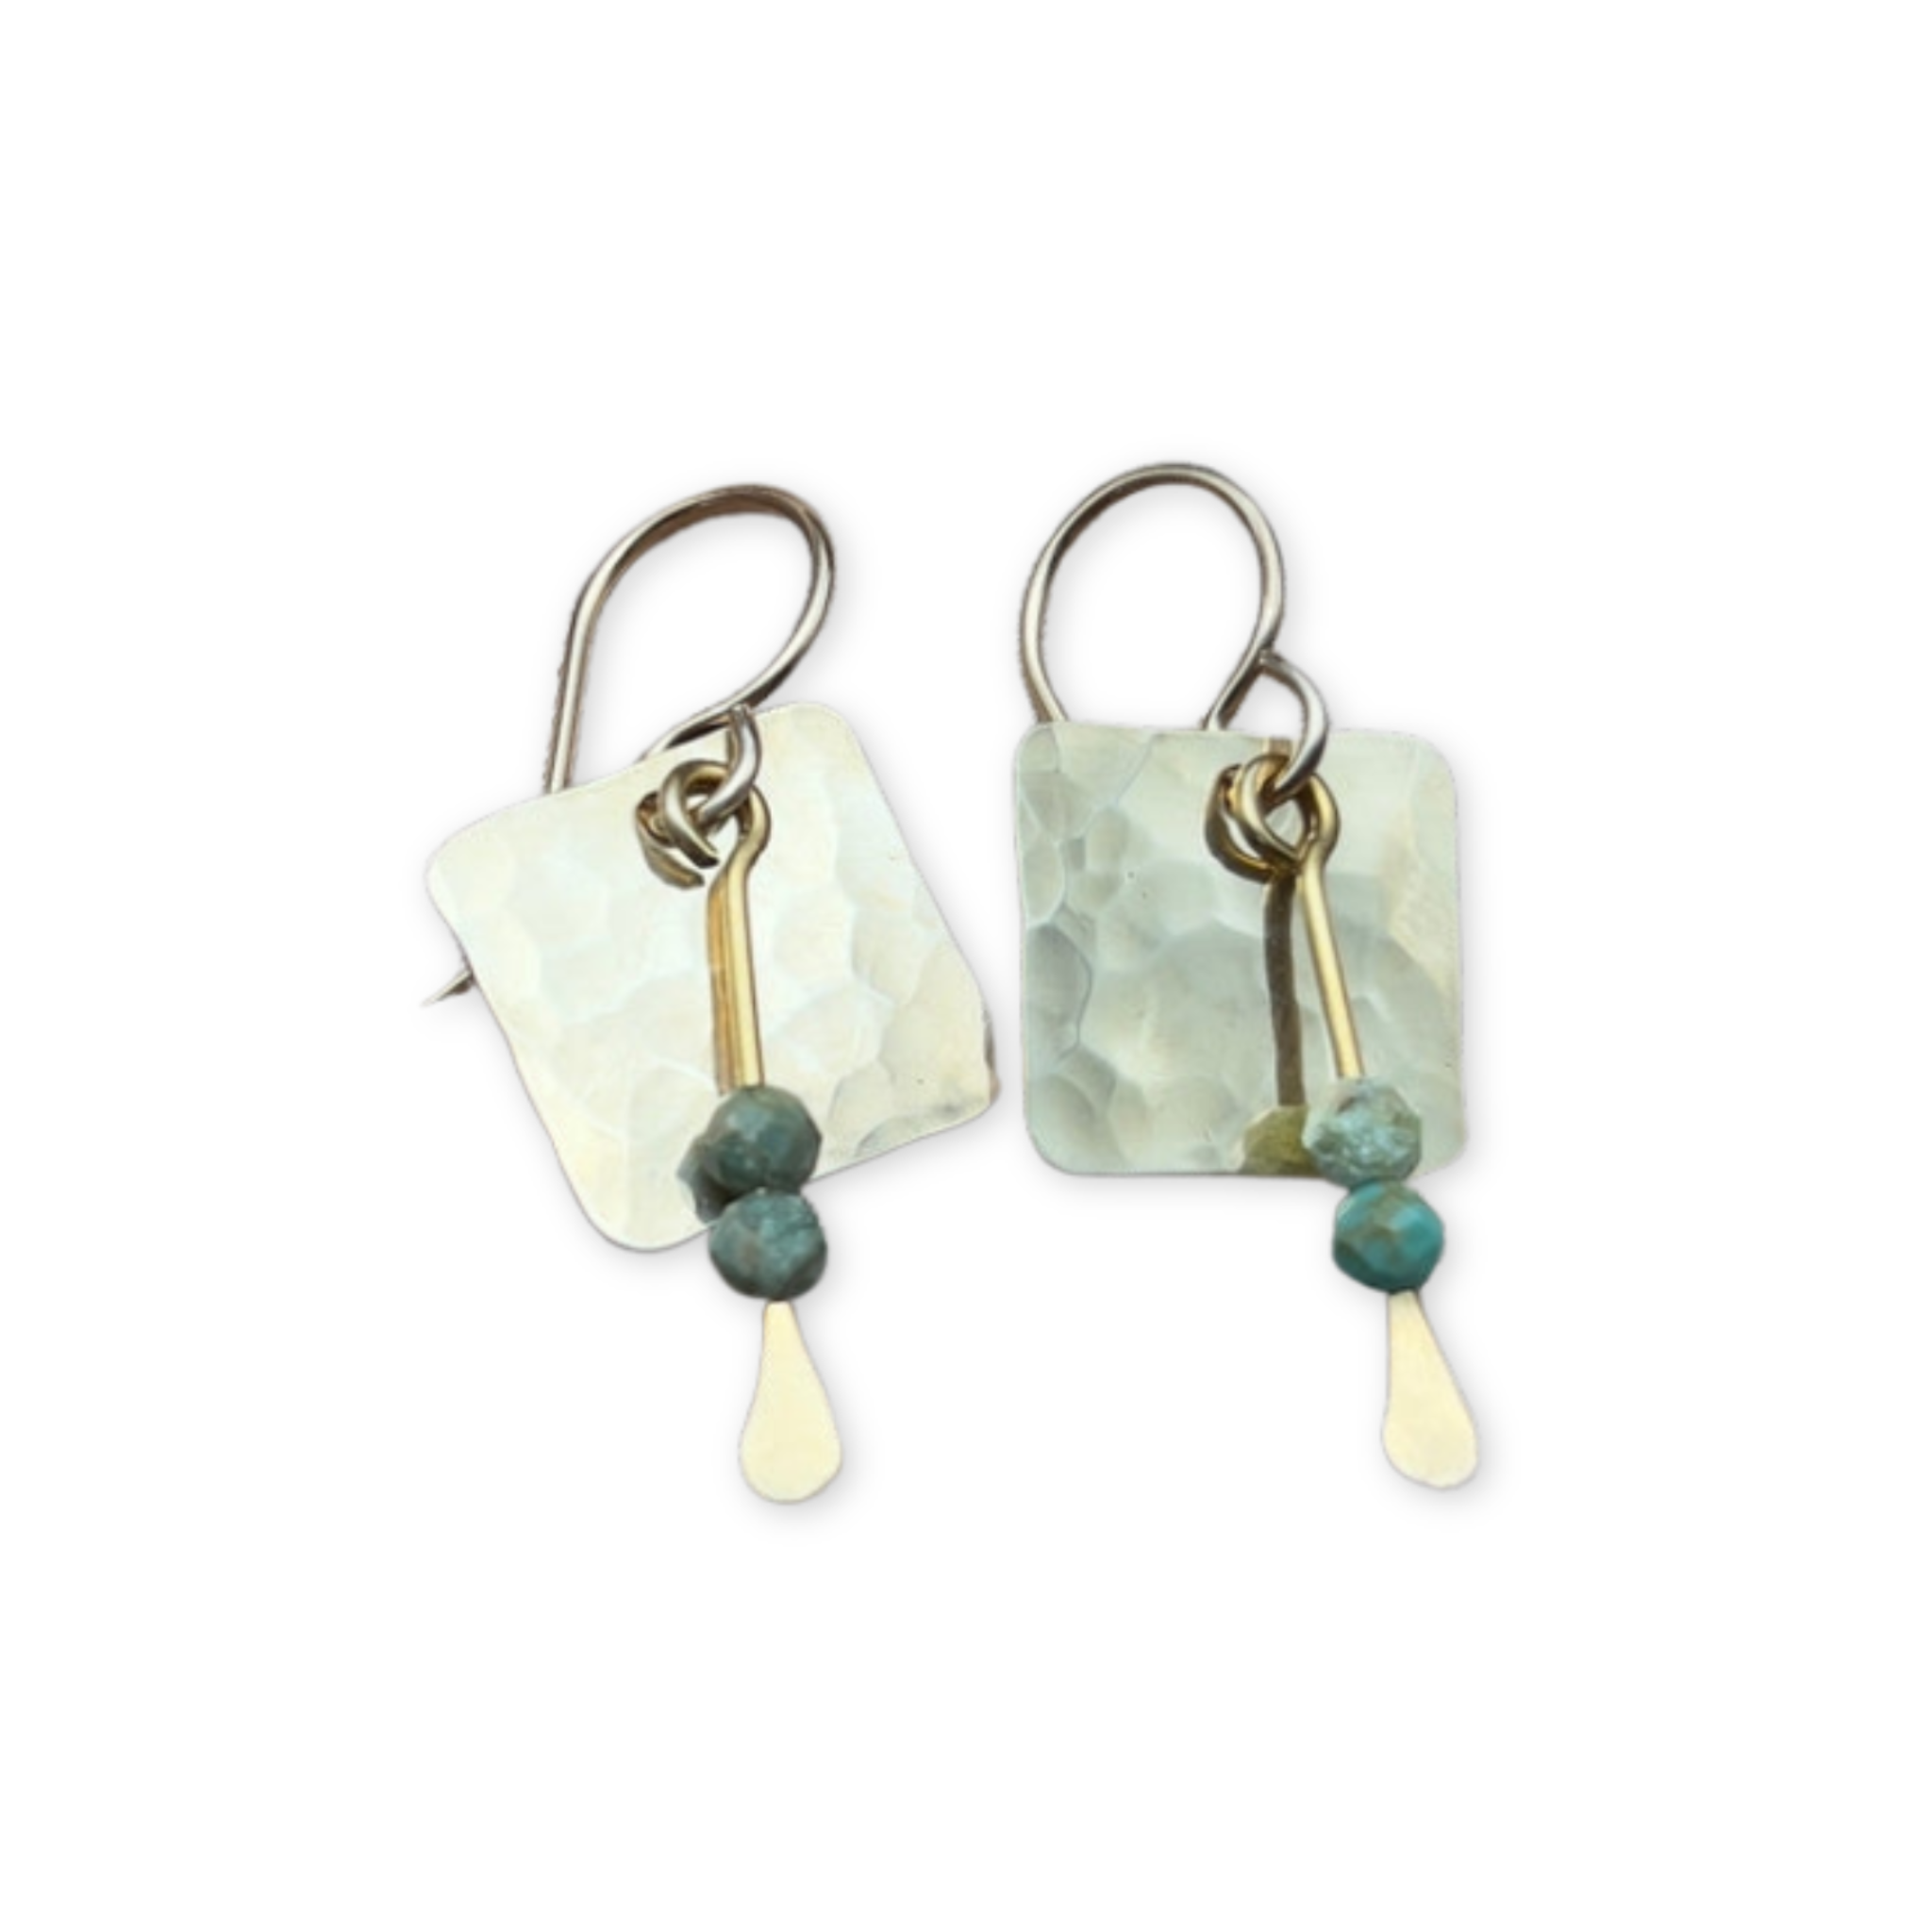 hammered square pendant earrings with two hanging stones